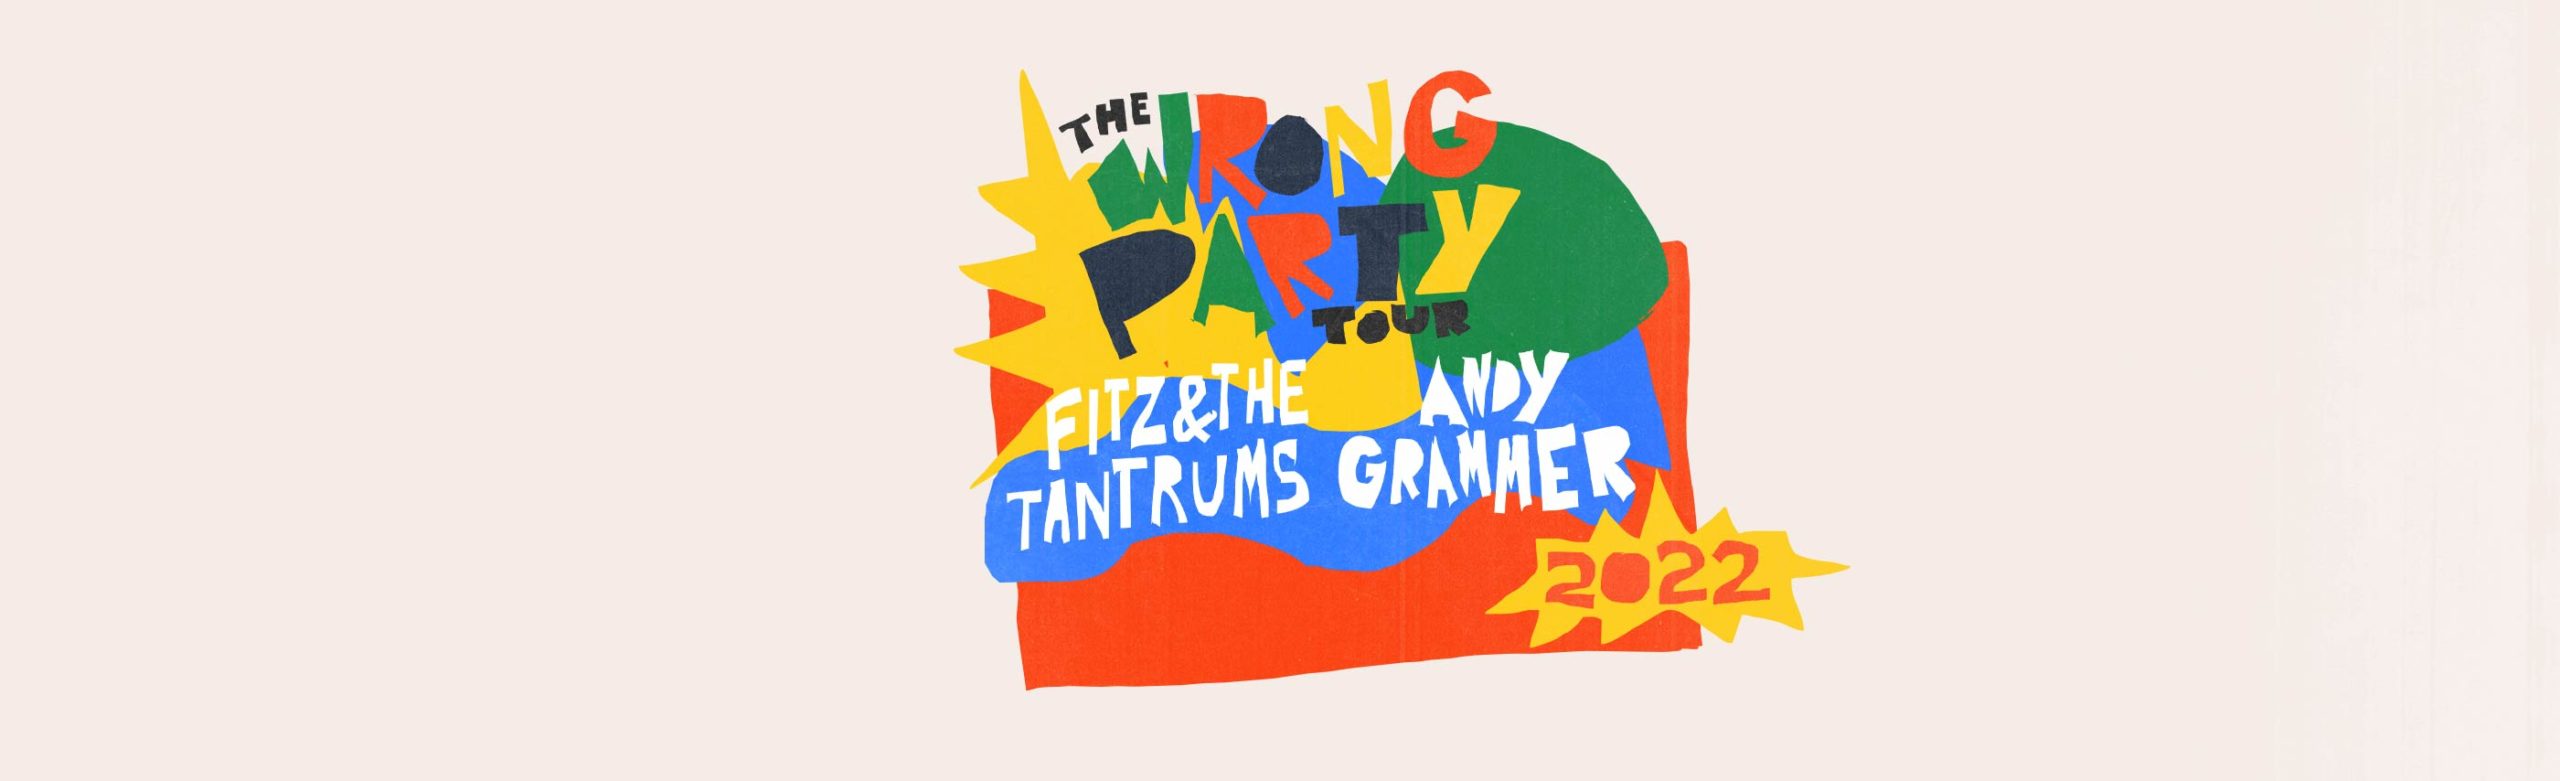 Event Info: Fitz and the Tantrums & Andy Grammer at KettleHouse Amphitheater 2022 Image